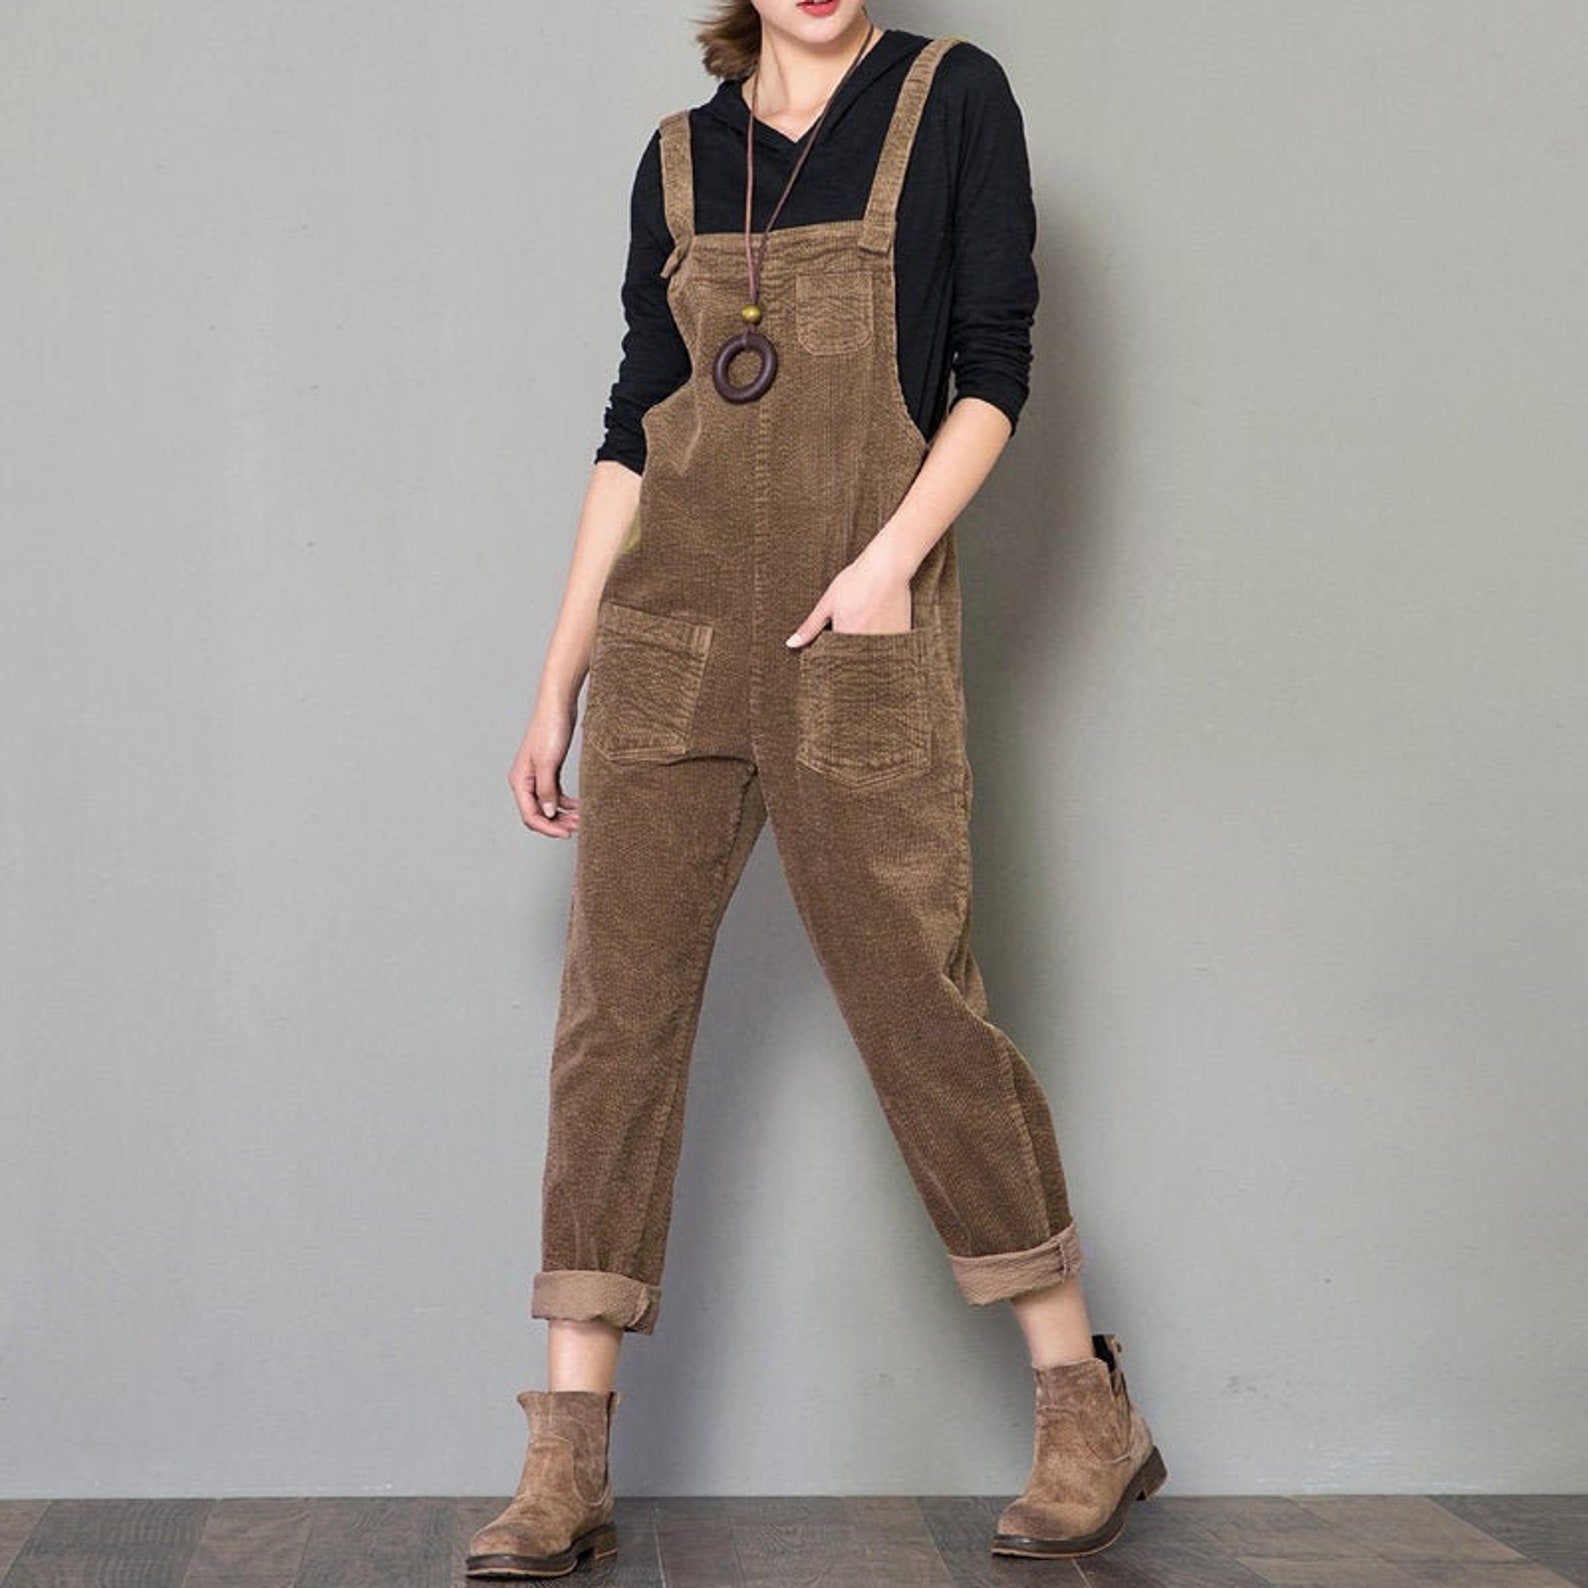 Women Brown Corduroy Overalls Leisure Jumpsuits LY0002 | Etsy